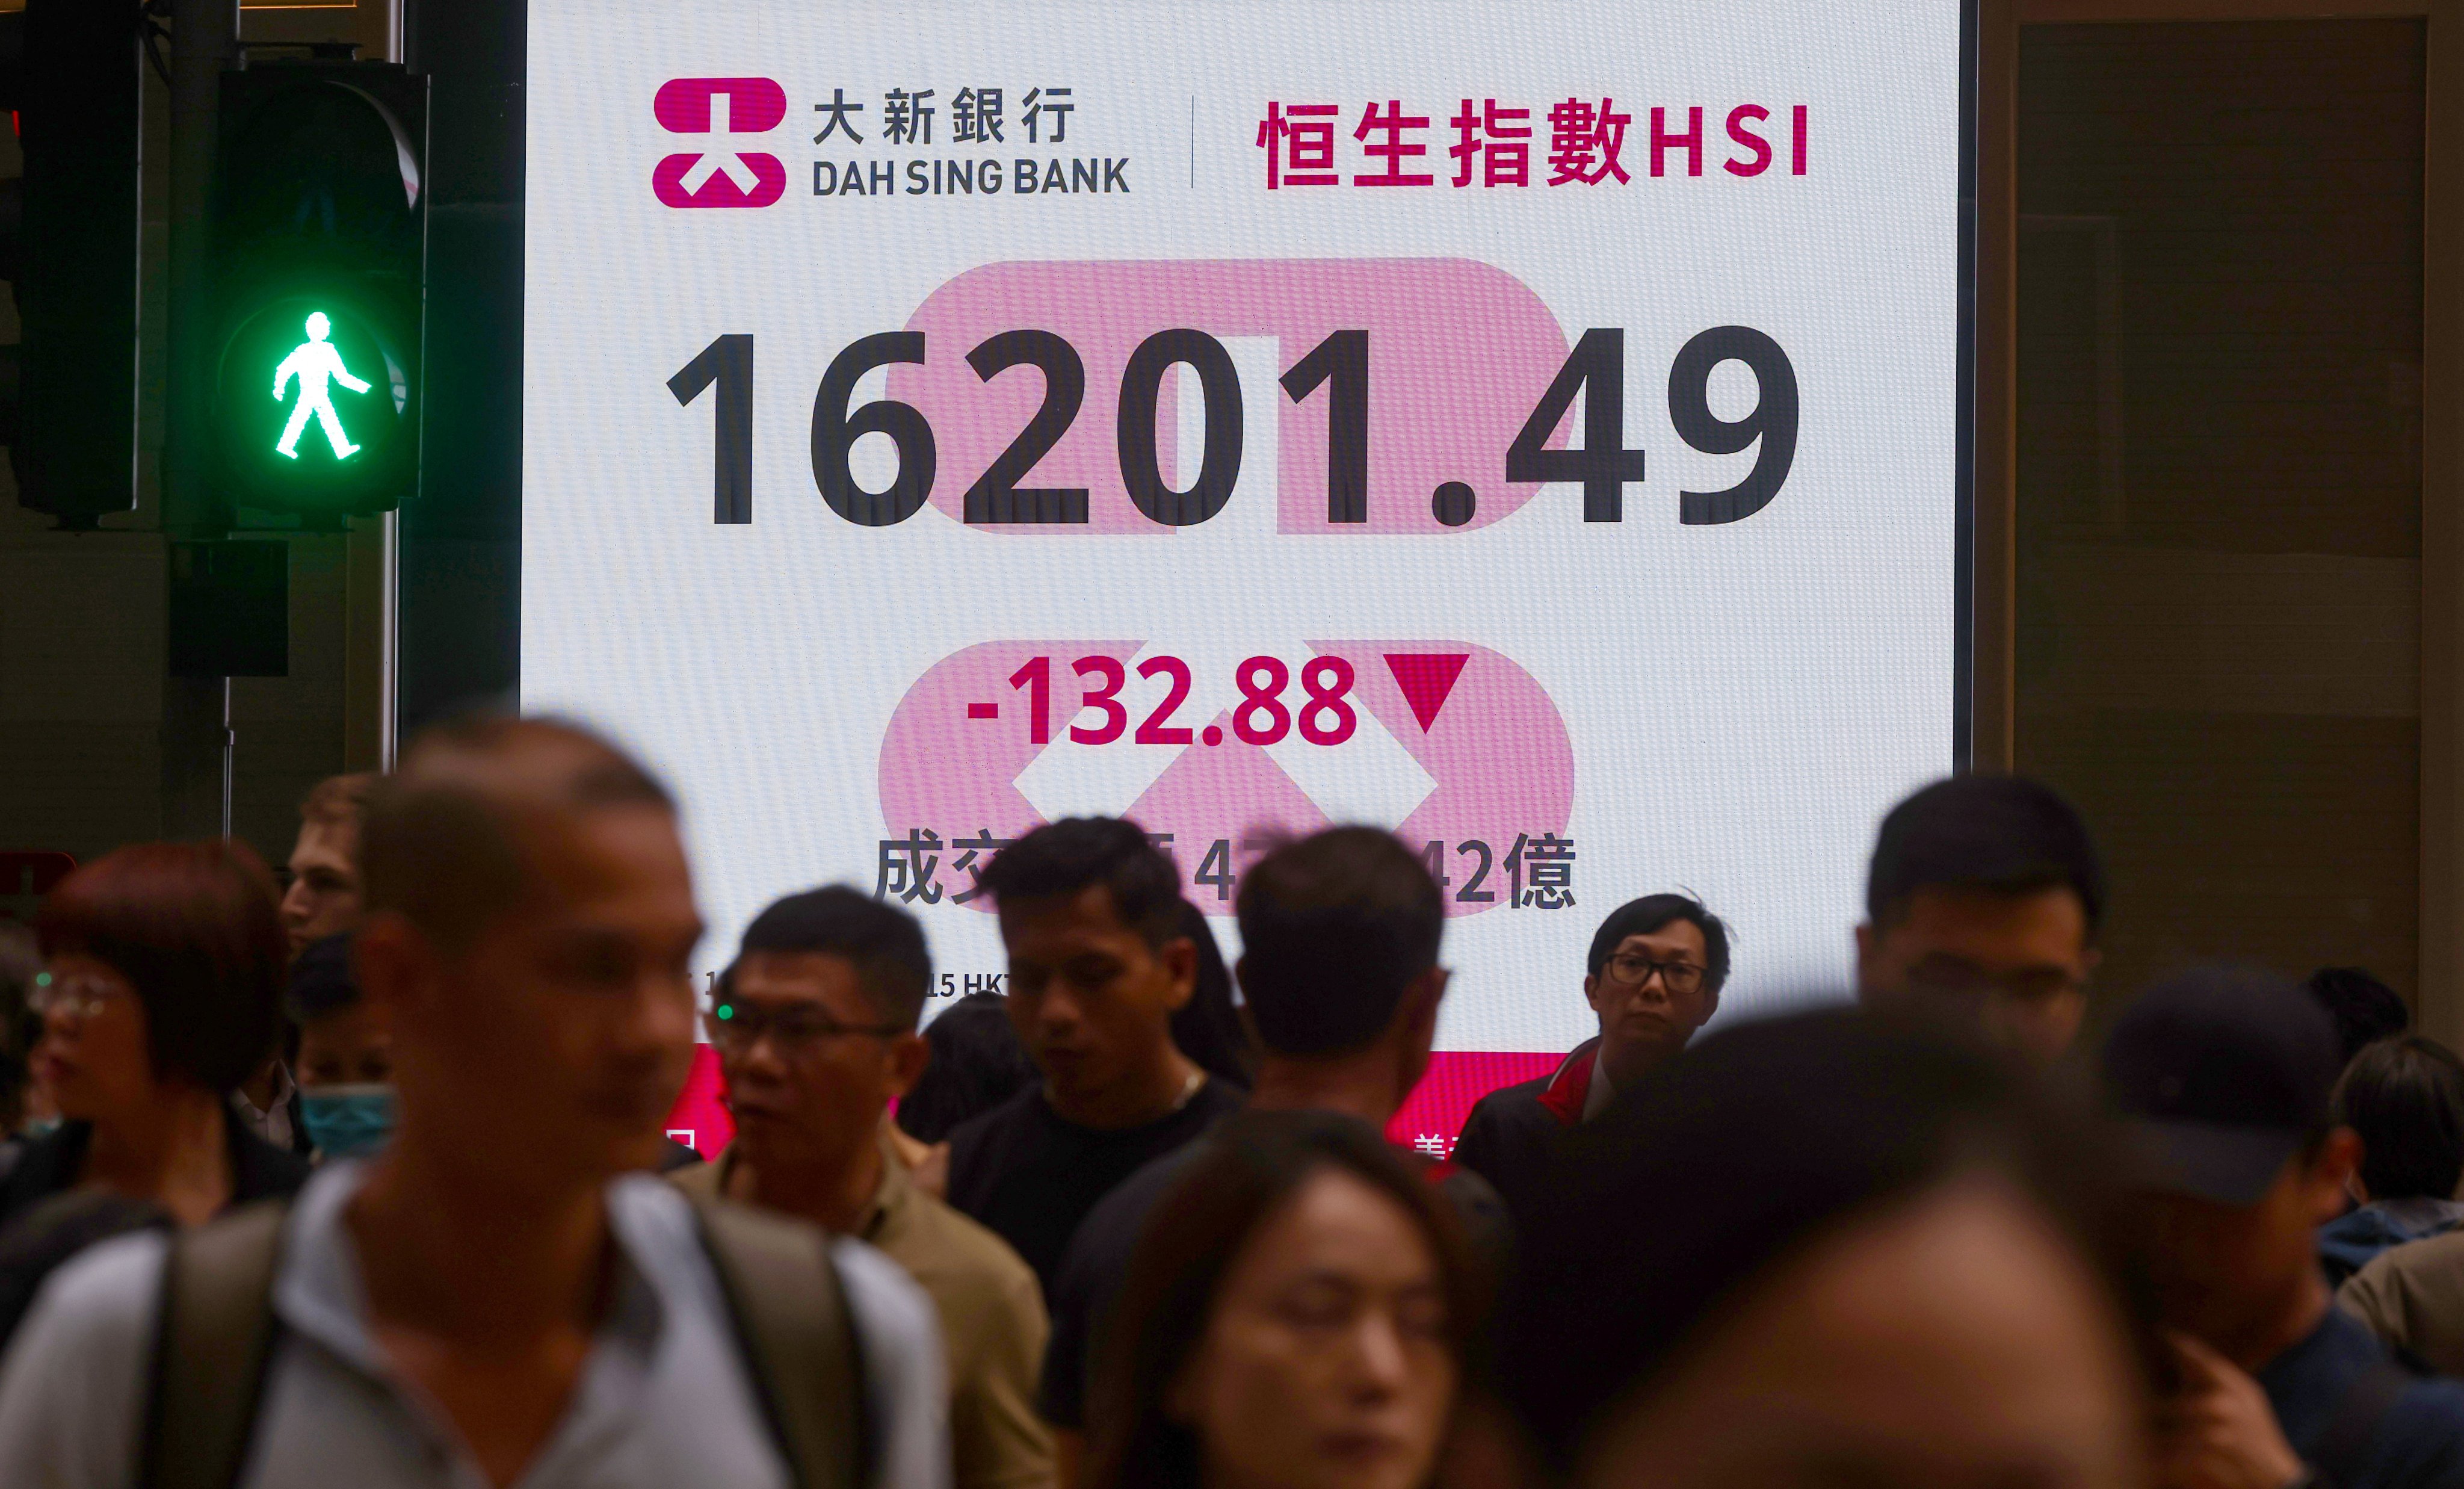 An electric monitor shows the Hang Seng Index in Central on December 11 when it fell to 16,201 points, approaching the lowest level in 14 months. Although investors have reason to feel aggrieved, there are still stocks worth watching in Hong Kong. Photo: Edmond So